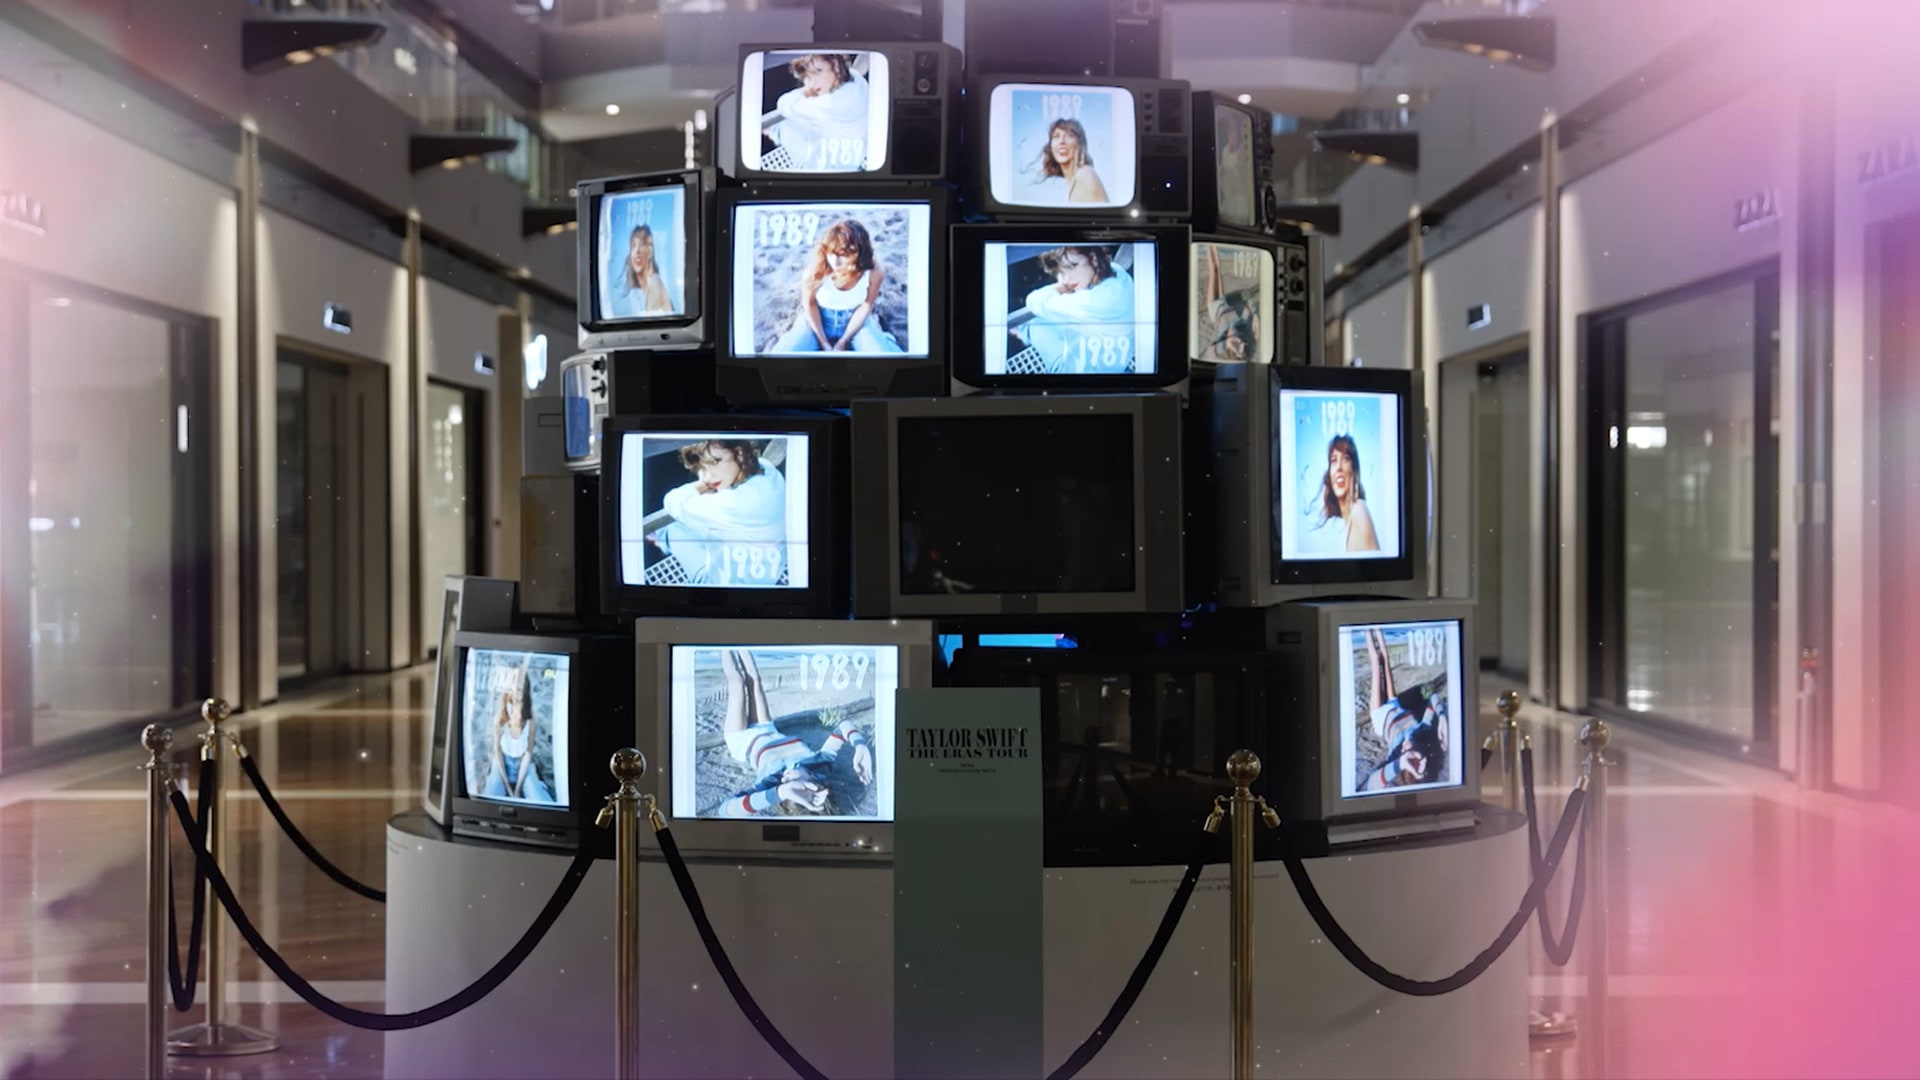 Retro TVs with Taylor Swift for an installation at Marina Bay Sands